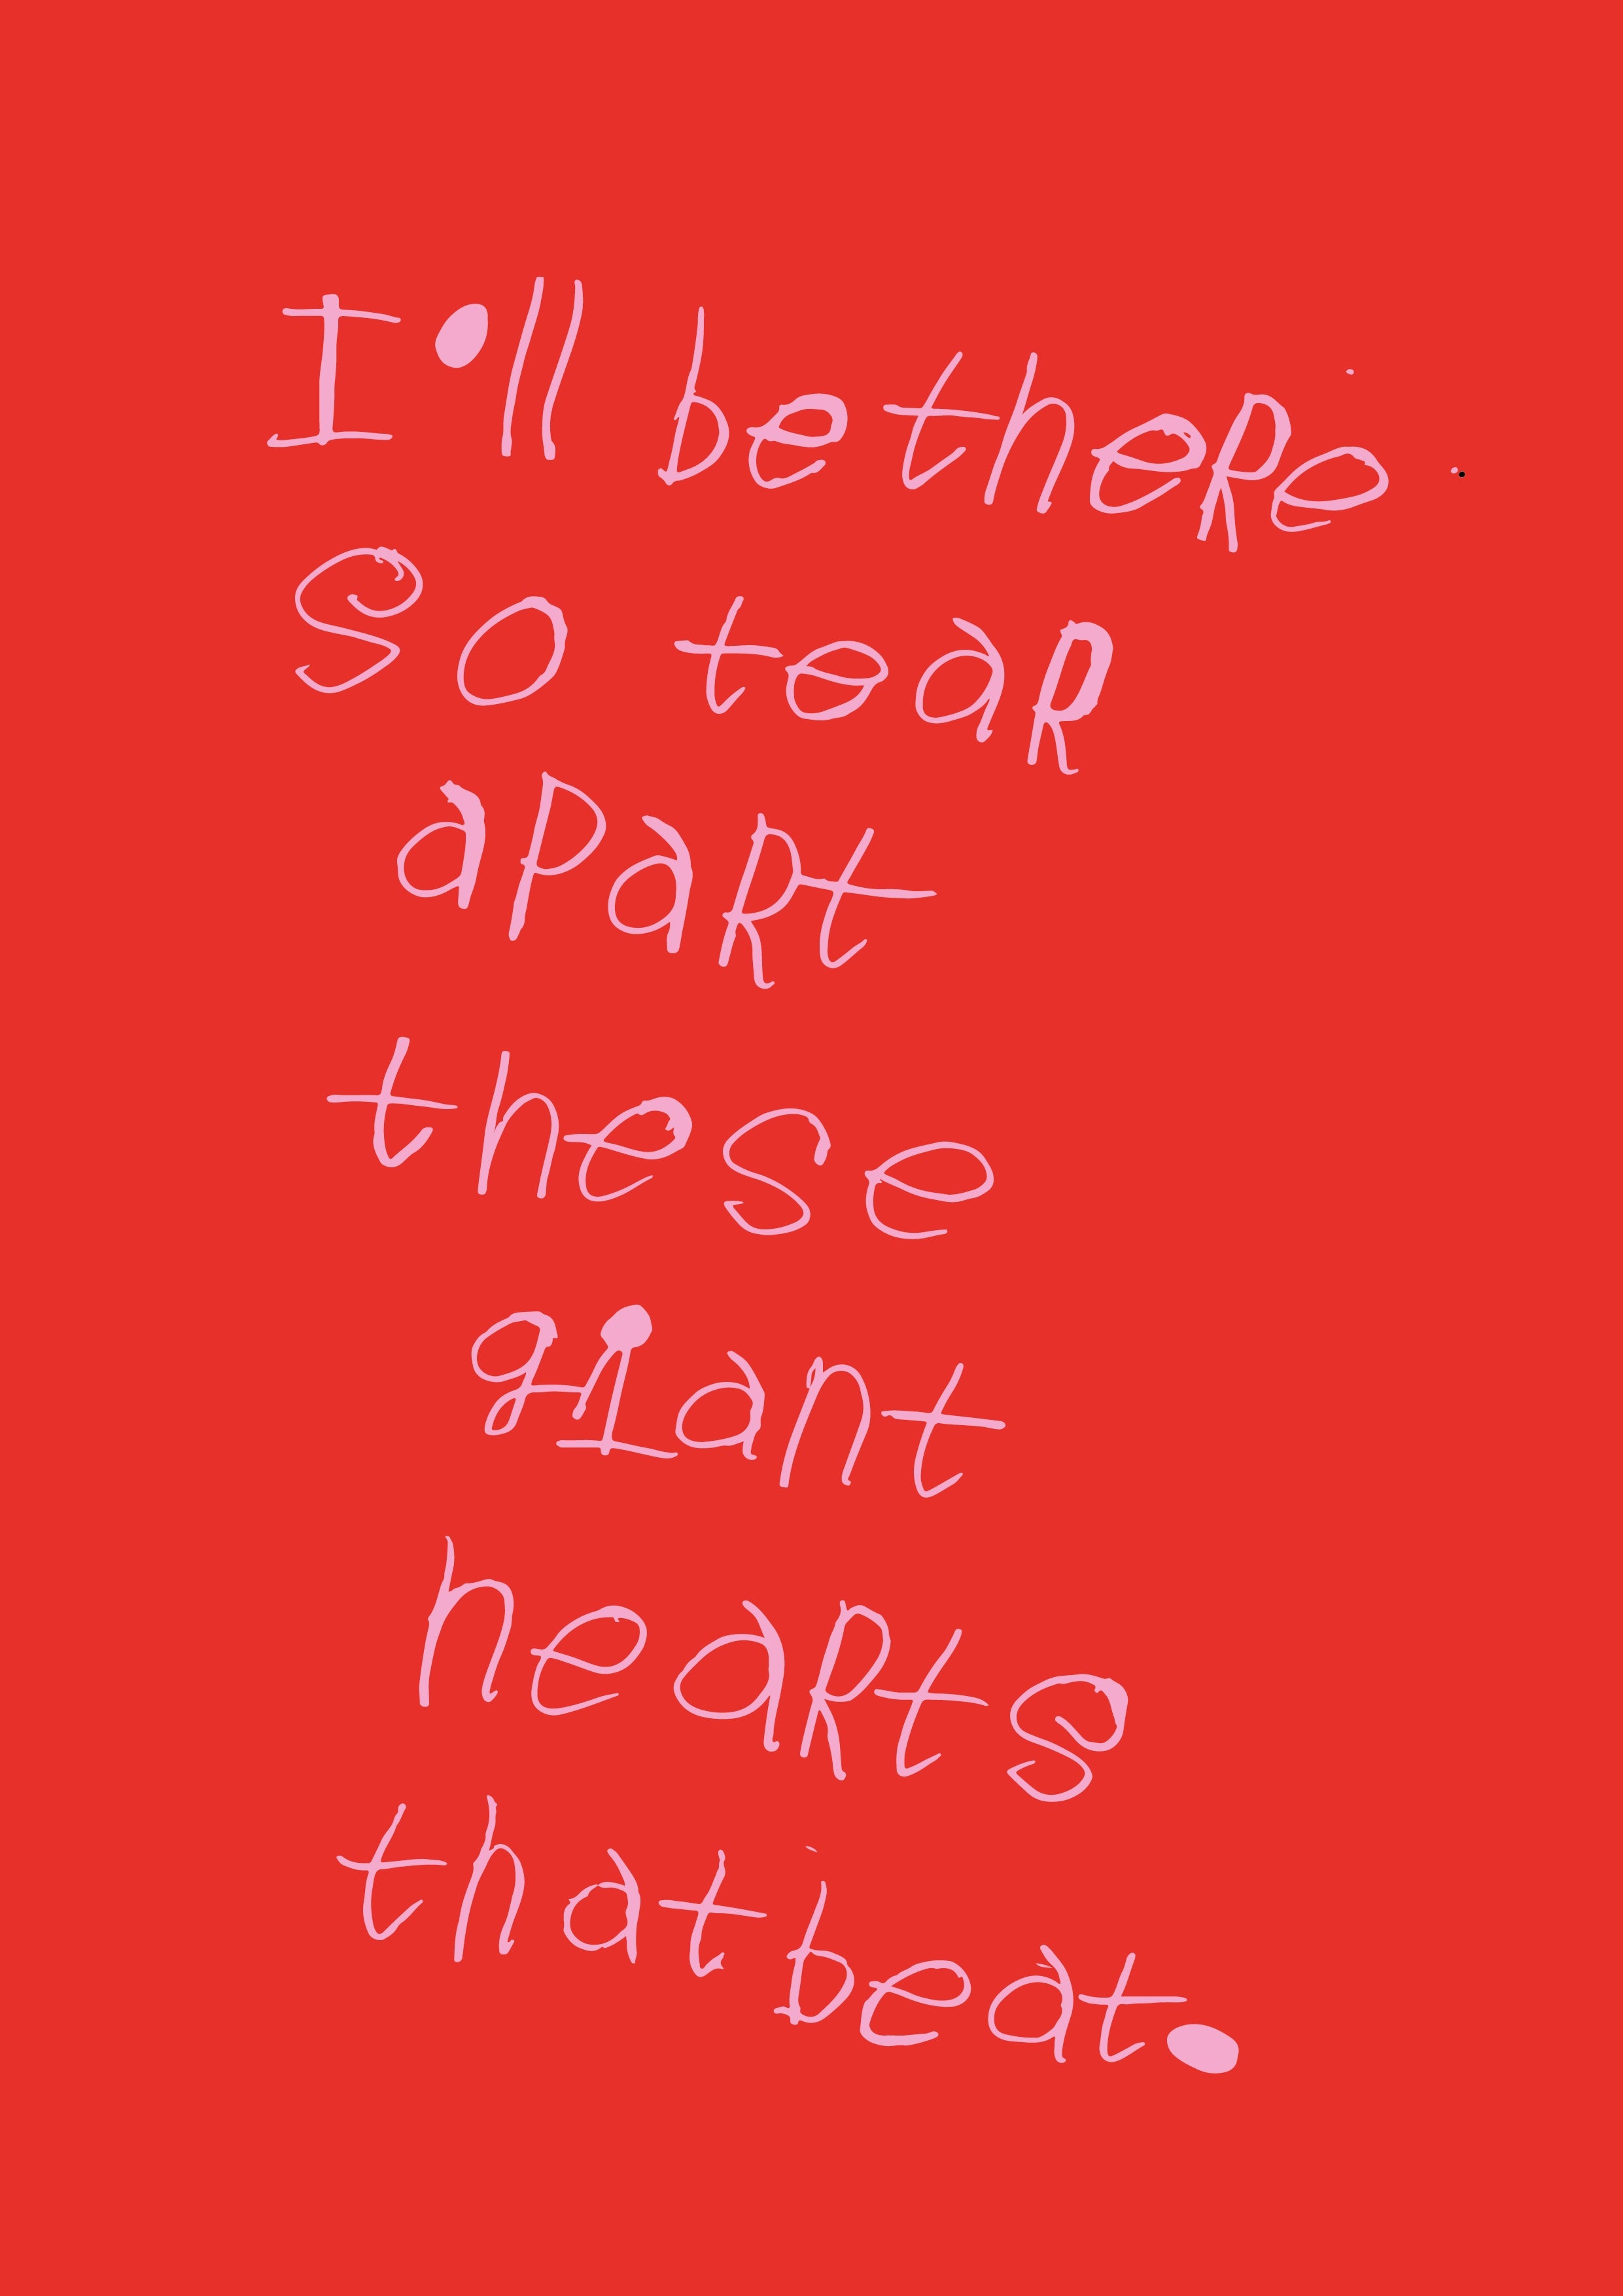 PRINT - I'LL BE THERE SO TEAR by NOTES BY PIPER red and pink